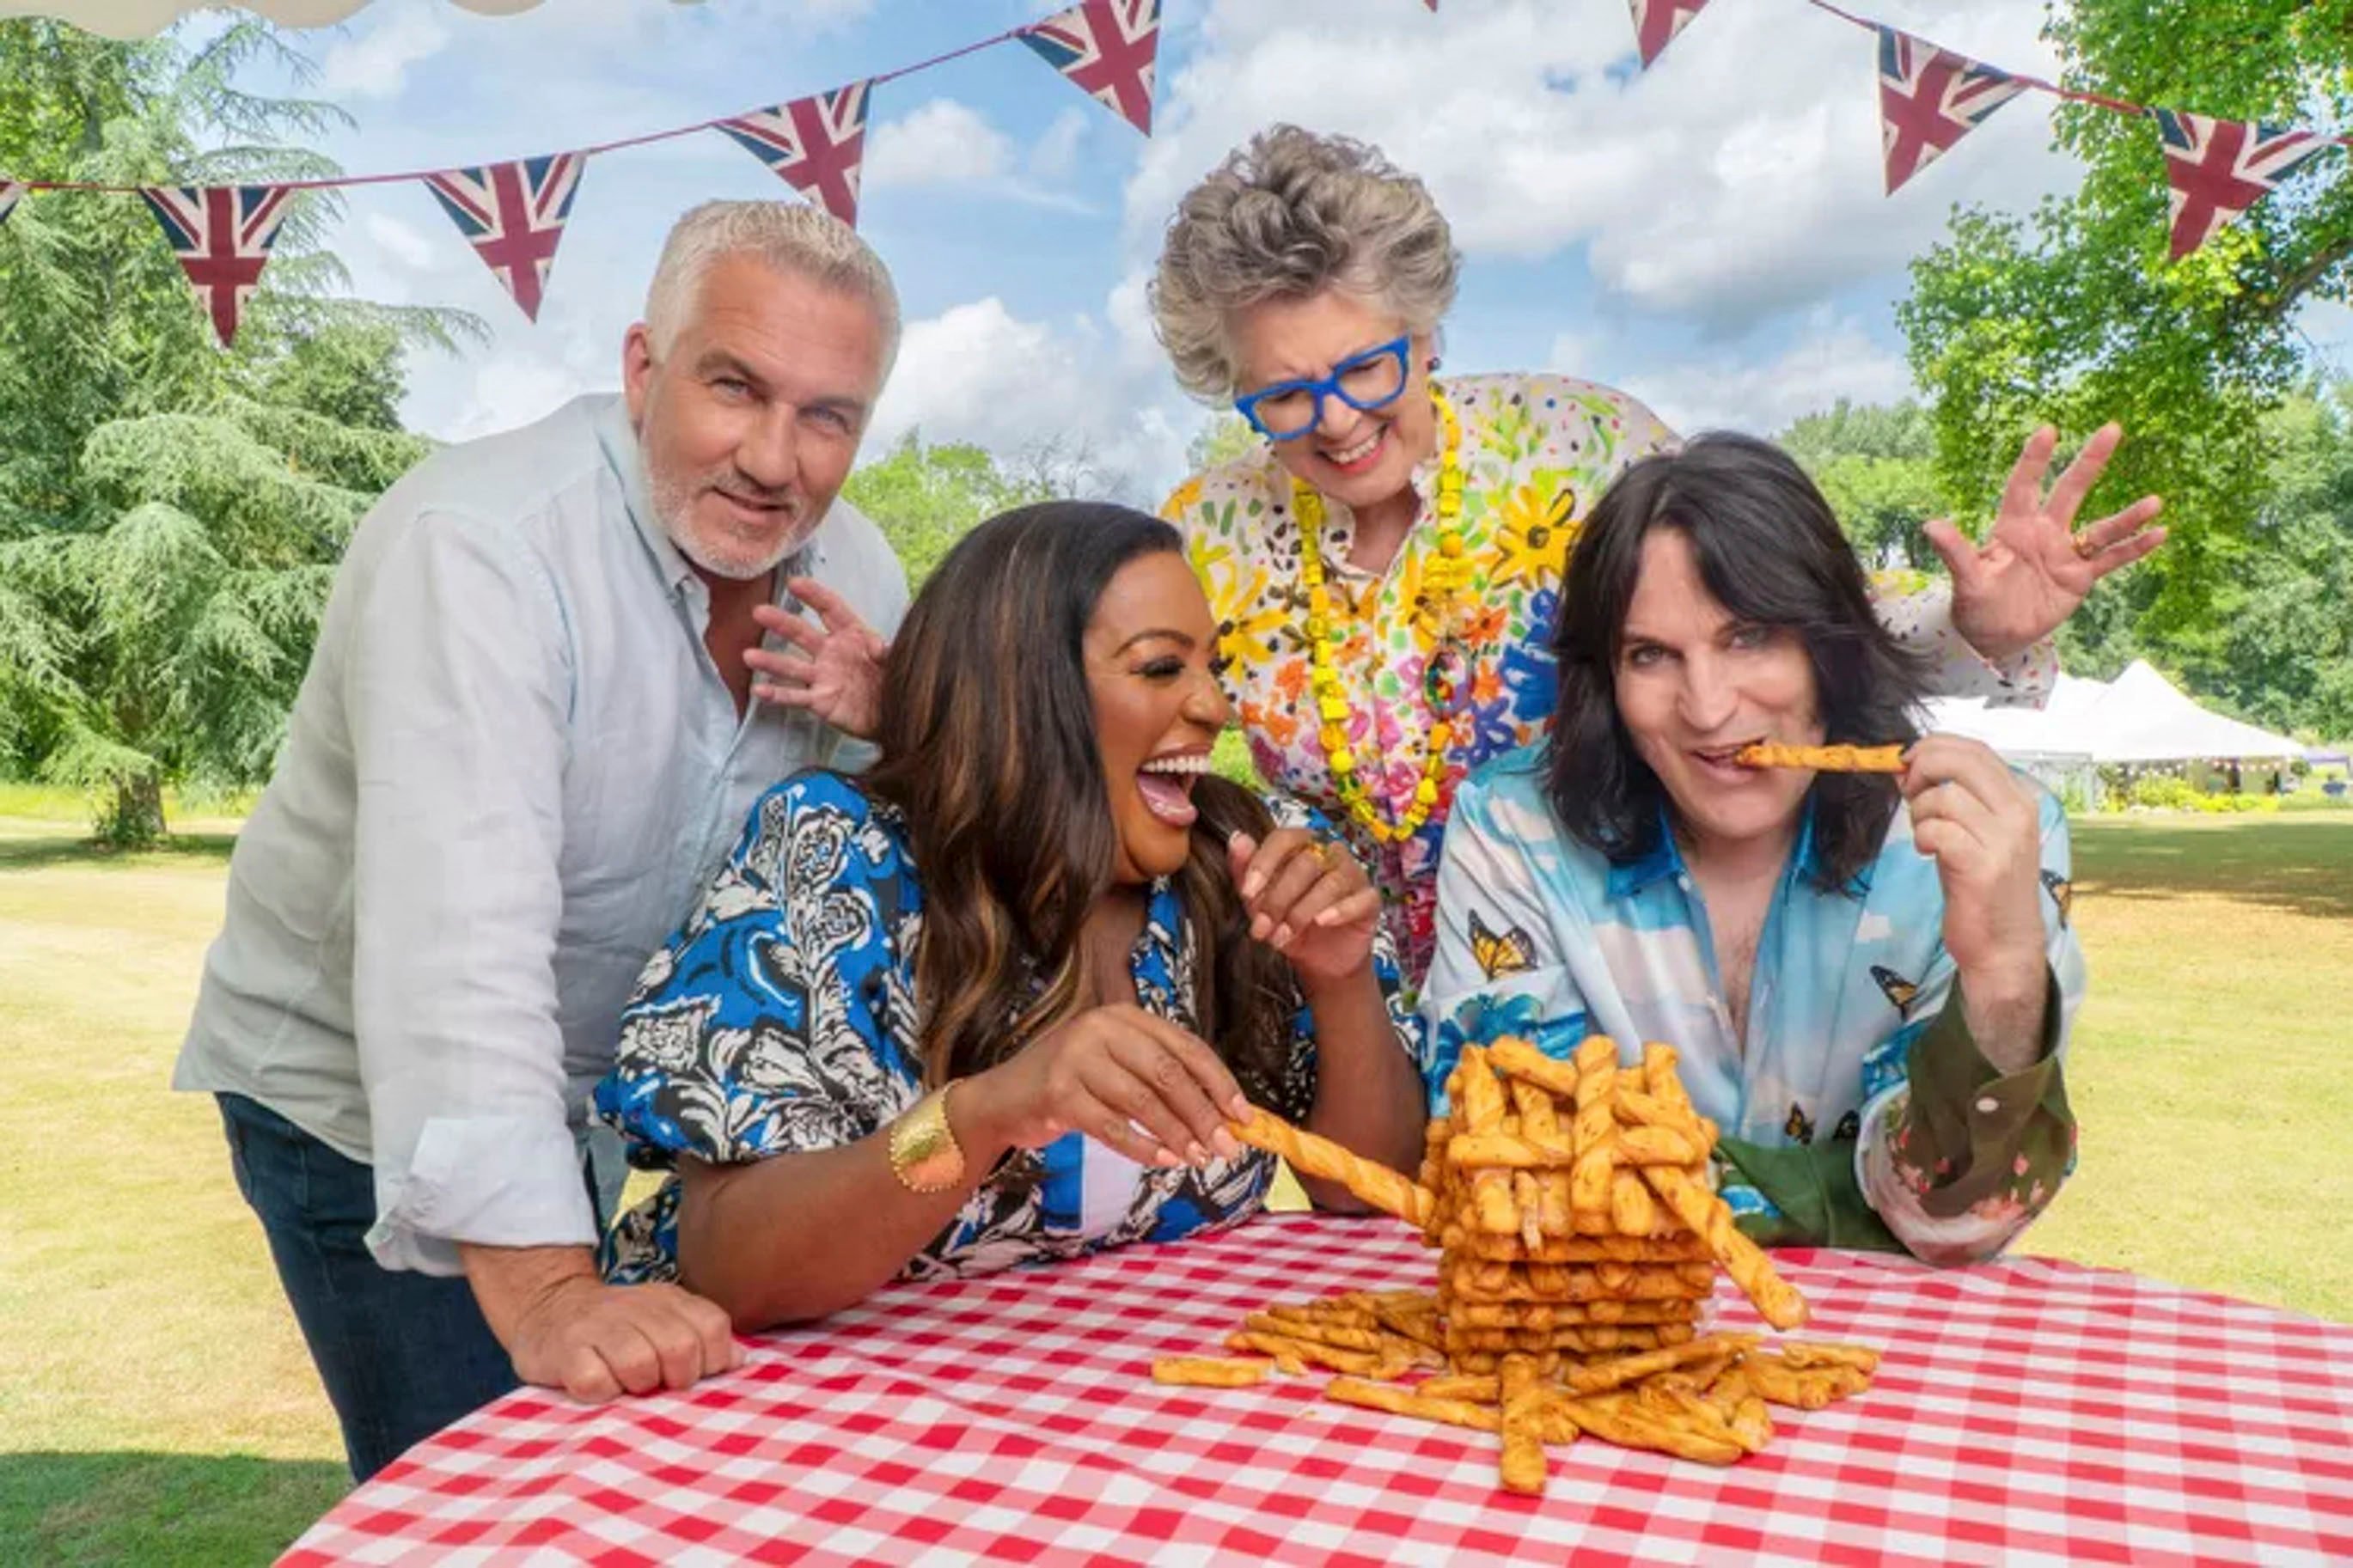 Netflix’s new season of “The Great British Baking Show” is just one of the new cooking shows to watch now, along with “Lessons in Chemistry” with Brie Larson, “Five Star Chef” and more. Photo: Netflix